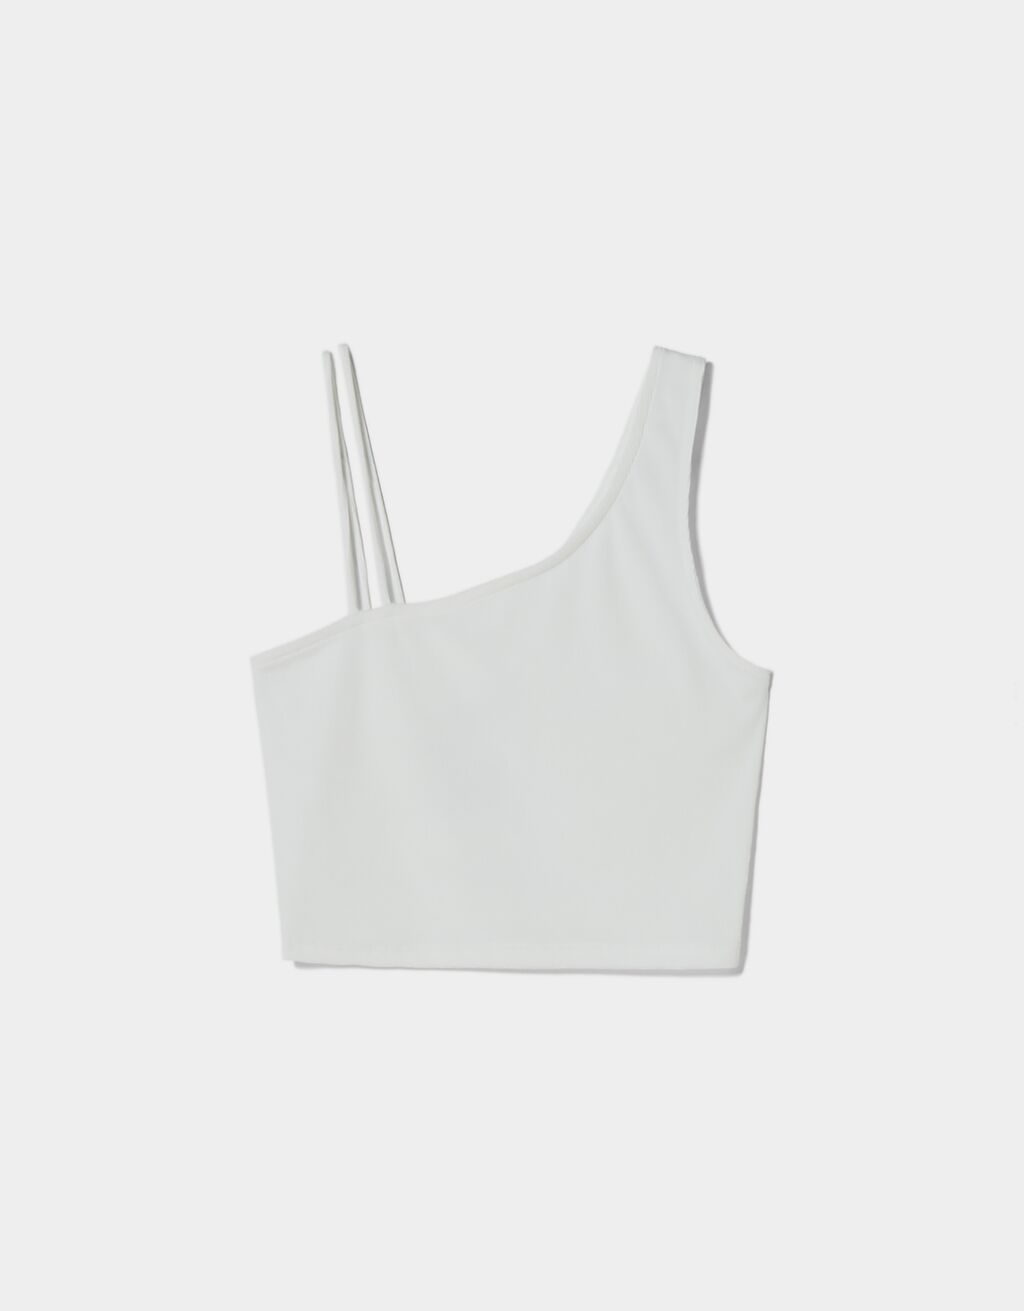 Asymmetric top with two straps